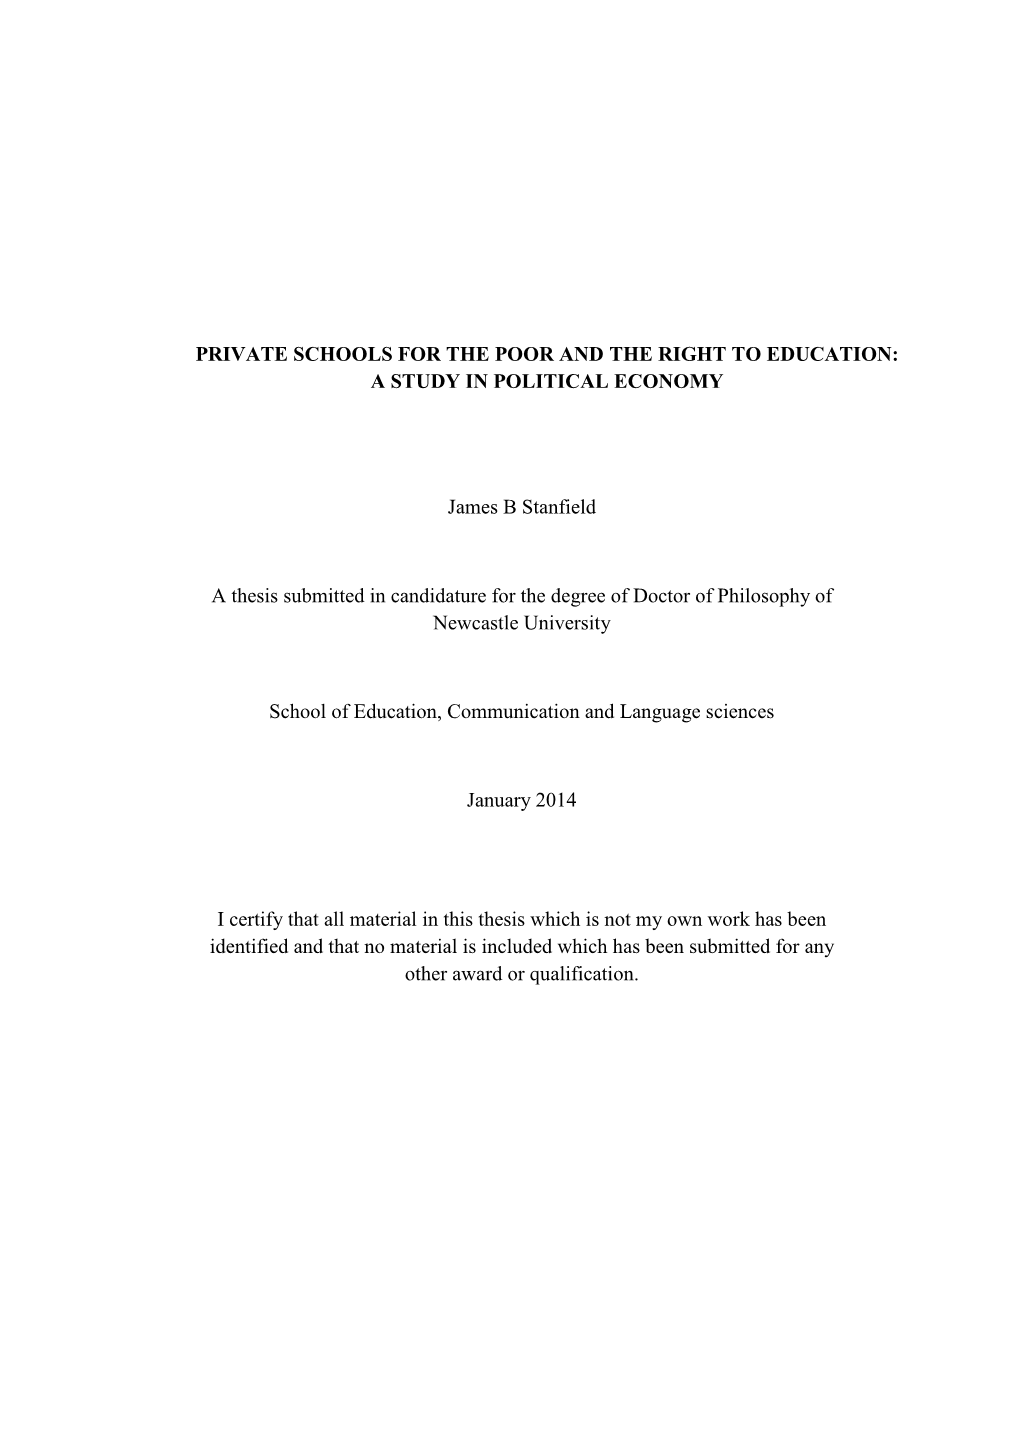 Private Schools for the Poor and the Right to Education: a Study in Political Economy